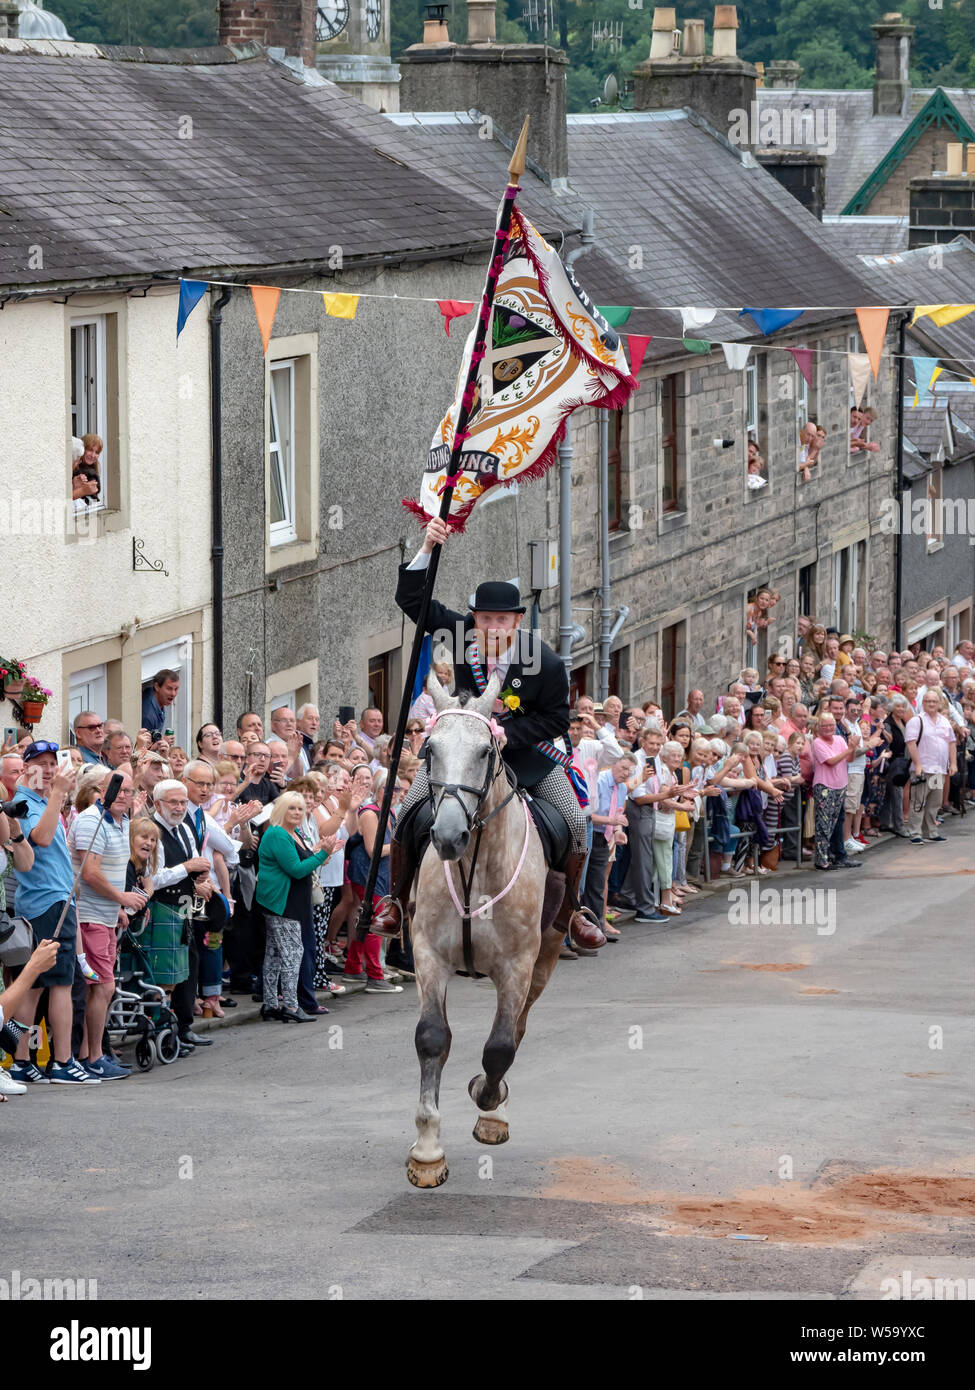 Langholm, Dumfries and Galloway, Scotland, UK. 26th July 2019. The Cornet, Henry Jeffrey, gallops up the Kirk Wynd carrying the Common Riding flag. Stock Photo